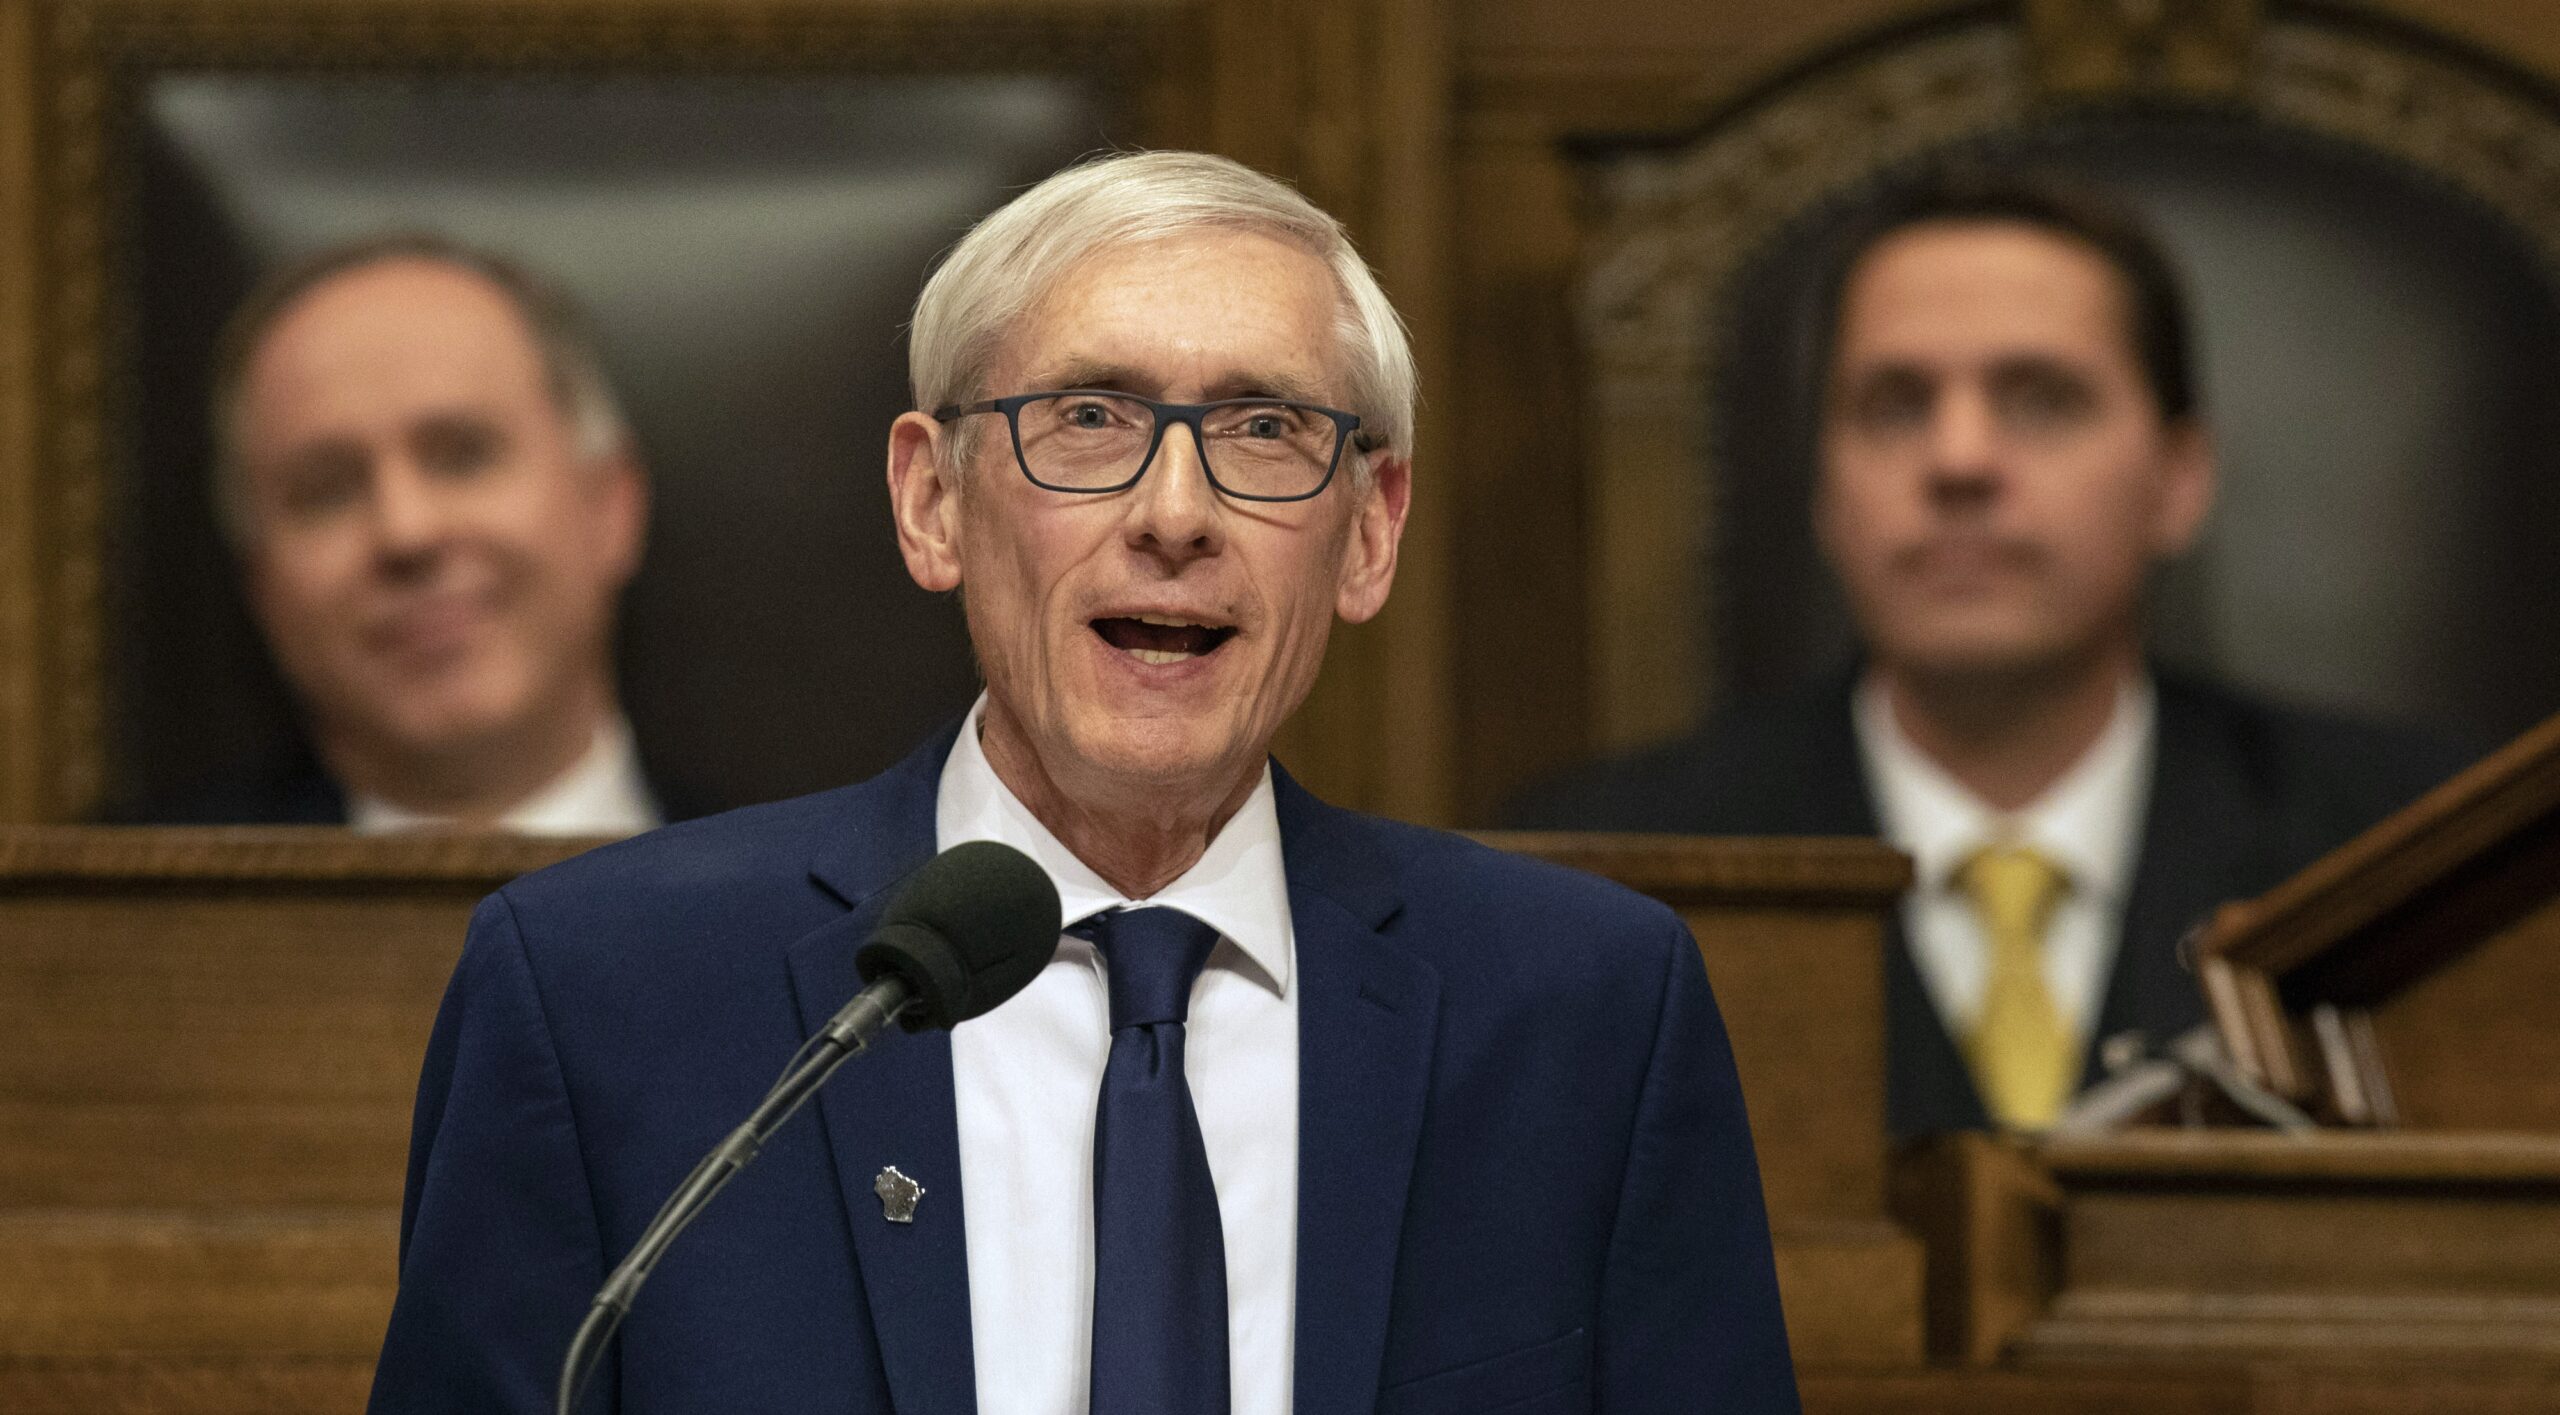 Gov. Tony Evers speaks at the State of the State